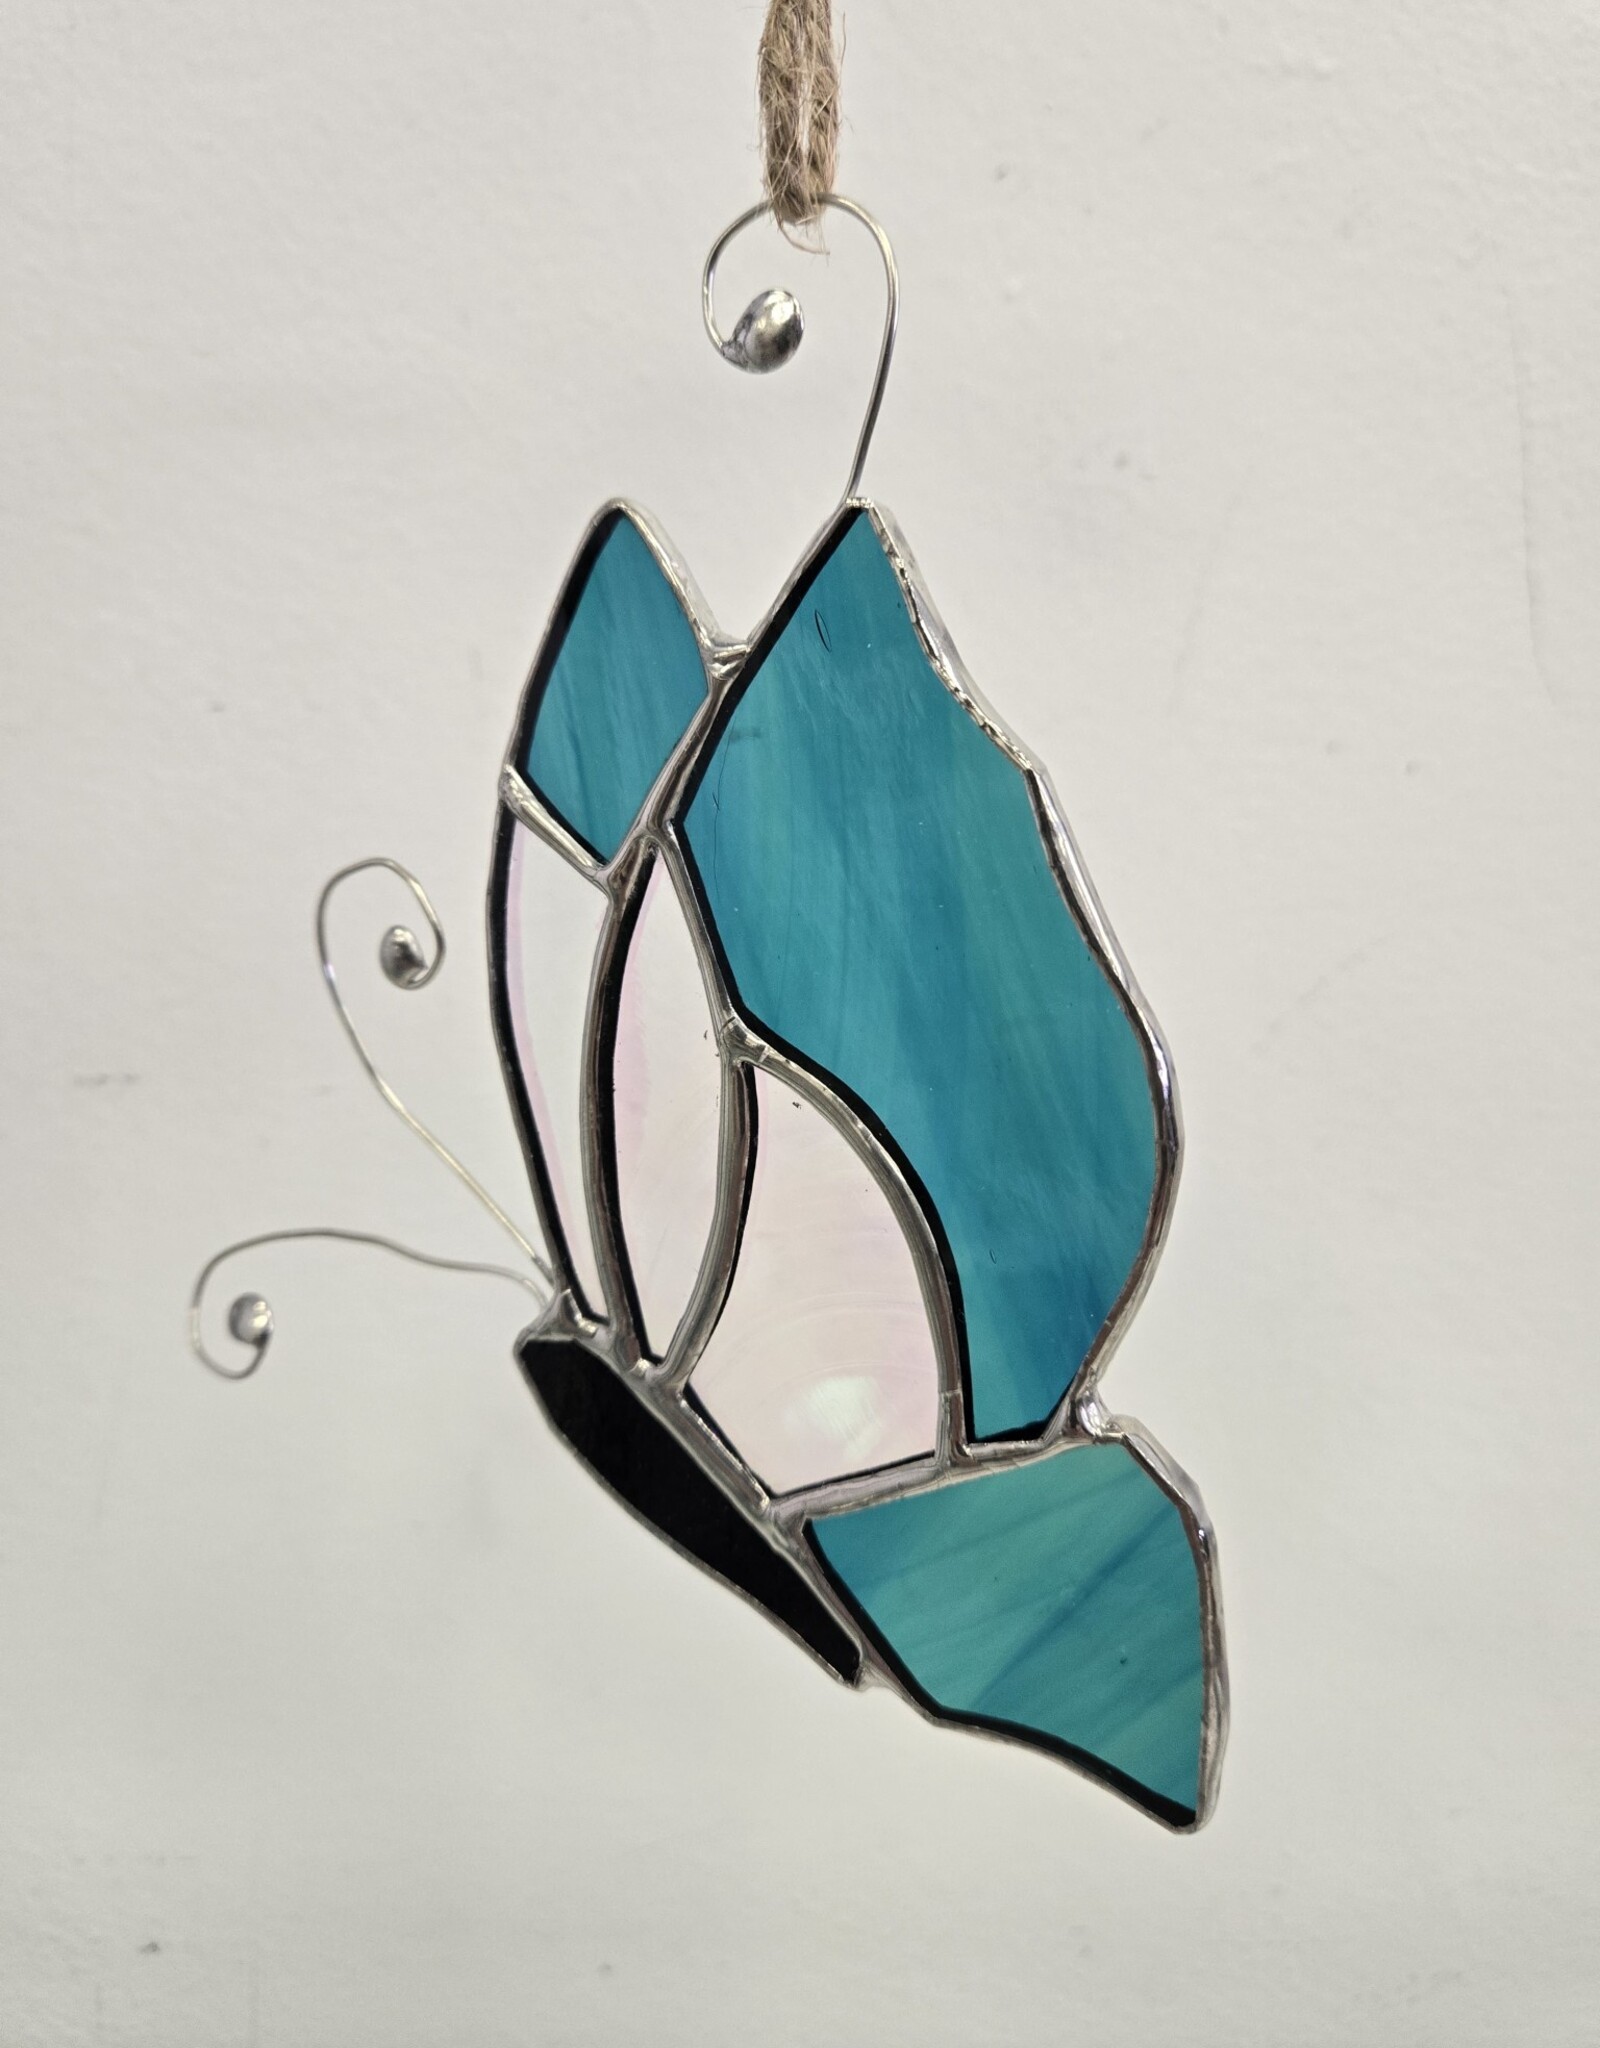 Stained Glass Butterfly Suncatcher - teal